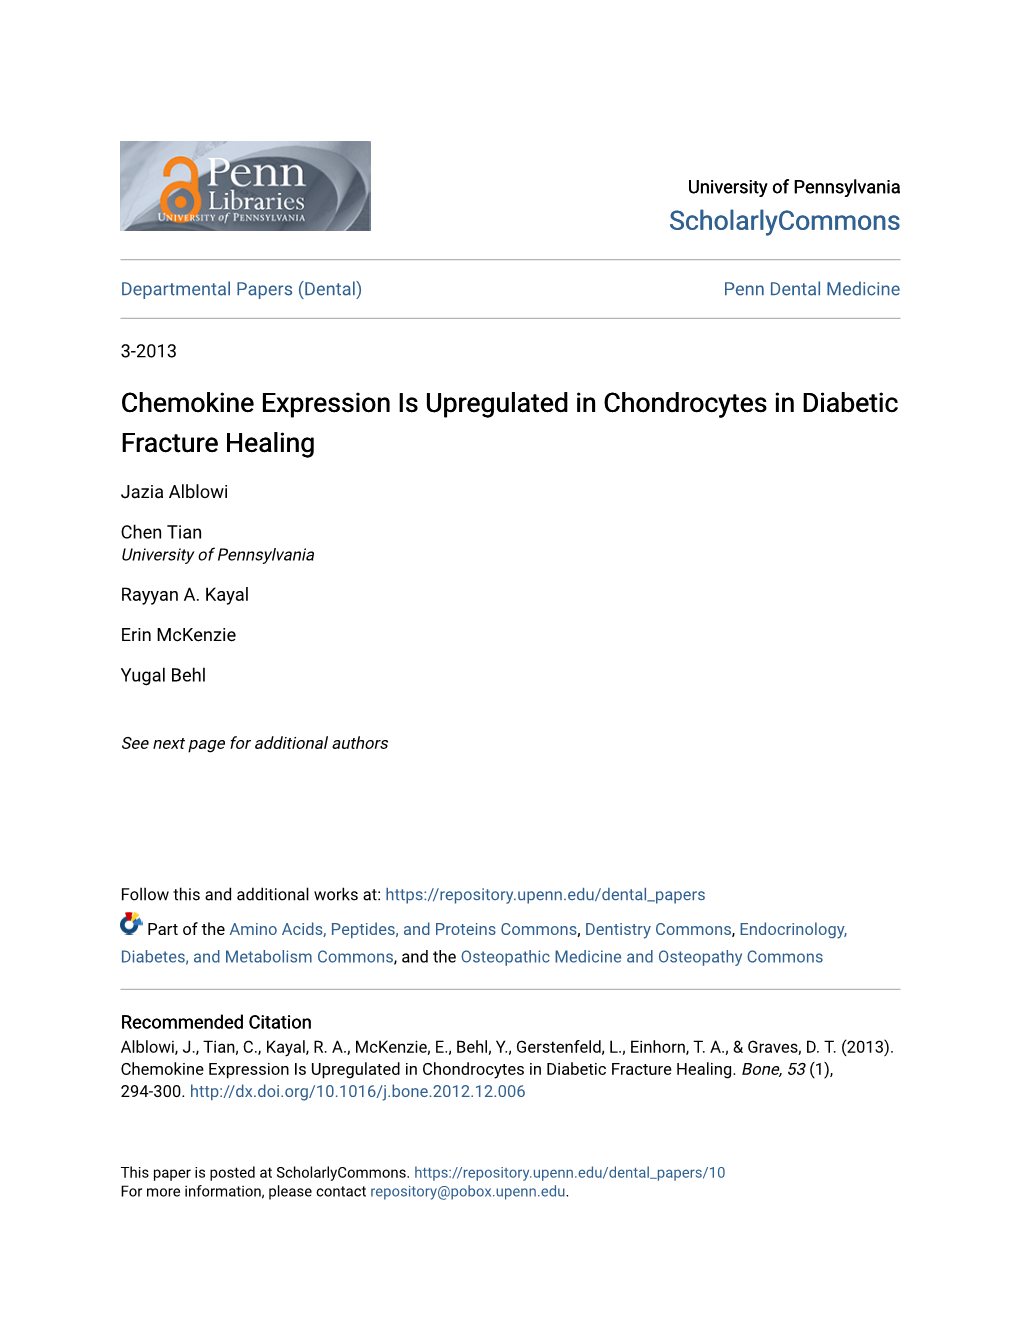 Chemokine Expression Is Upregulated in Chondrocytes in Diabetic Fracture Healing